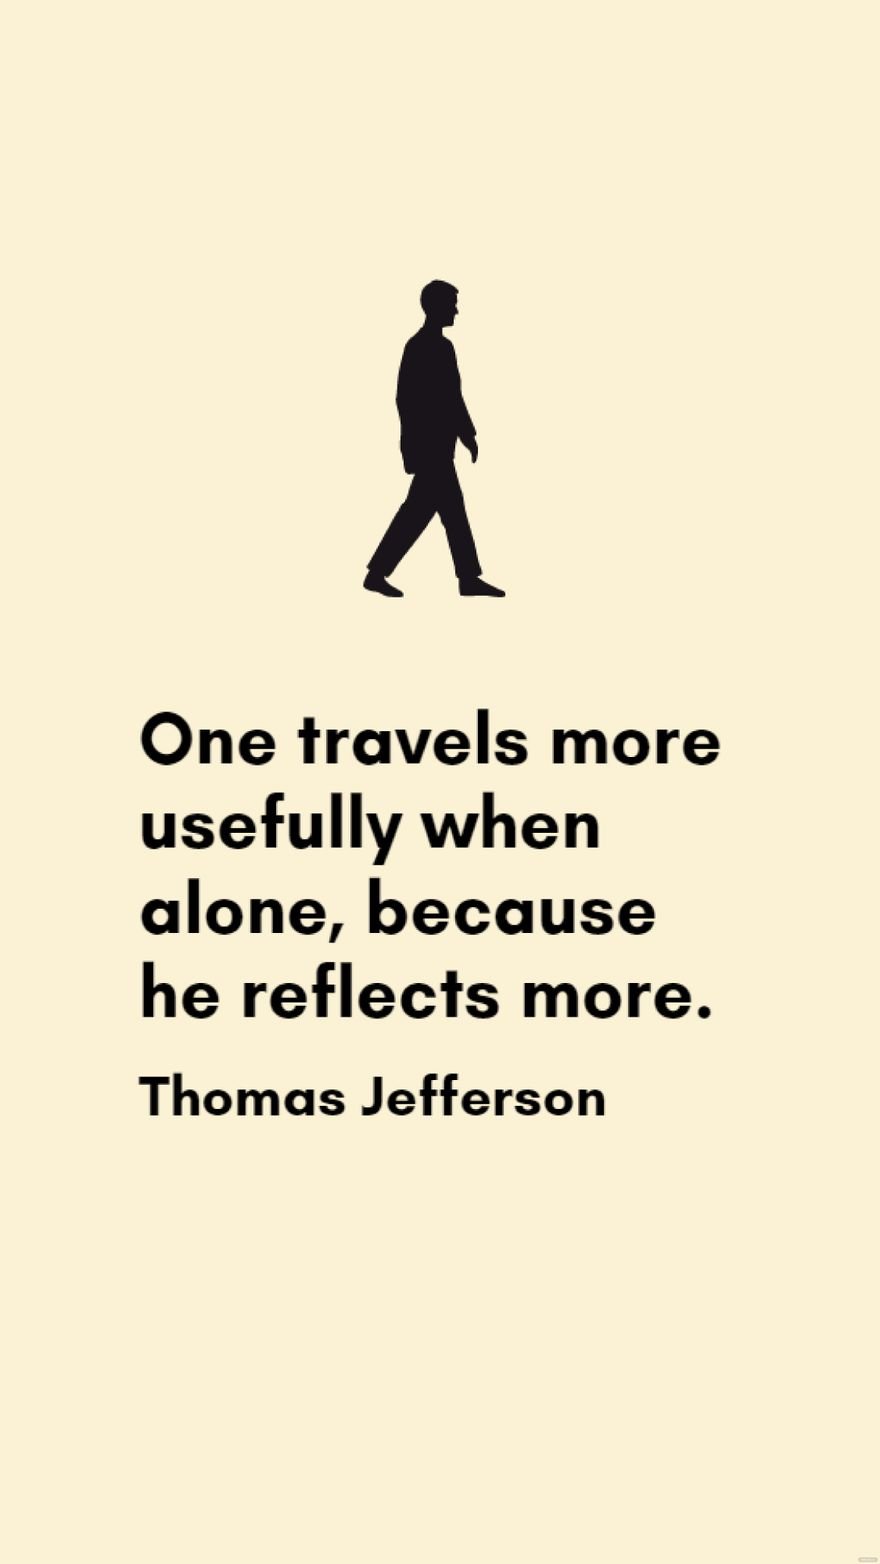 Thomas Jefferson - One travels more usefully when alone, because he reflects more.